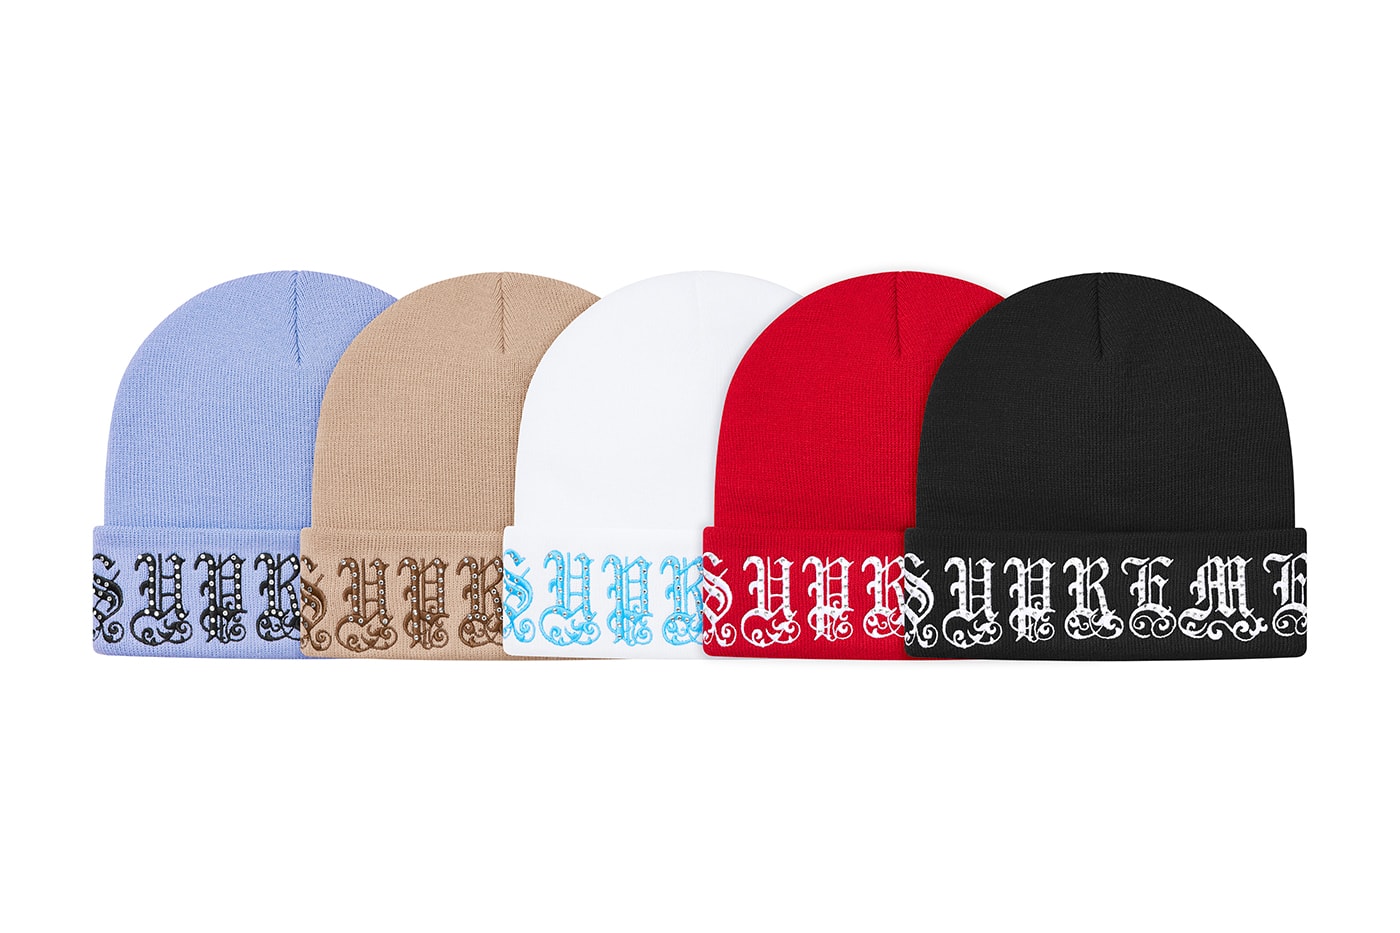 Supreme Spring/Summer 2021 Hats Caps camp 5/6 panels crusher beanies Buy price date info